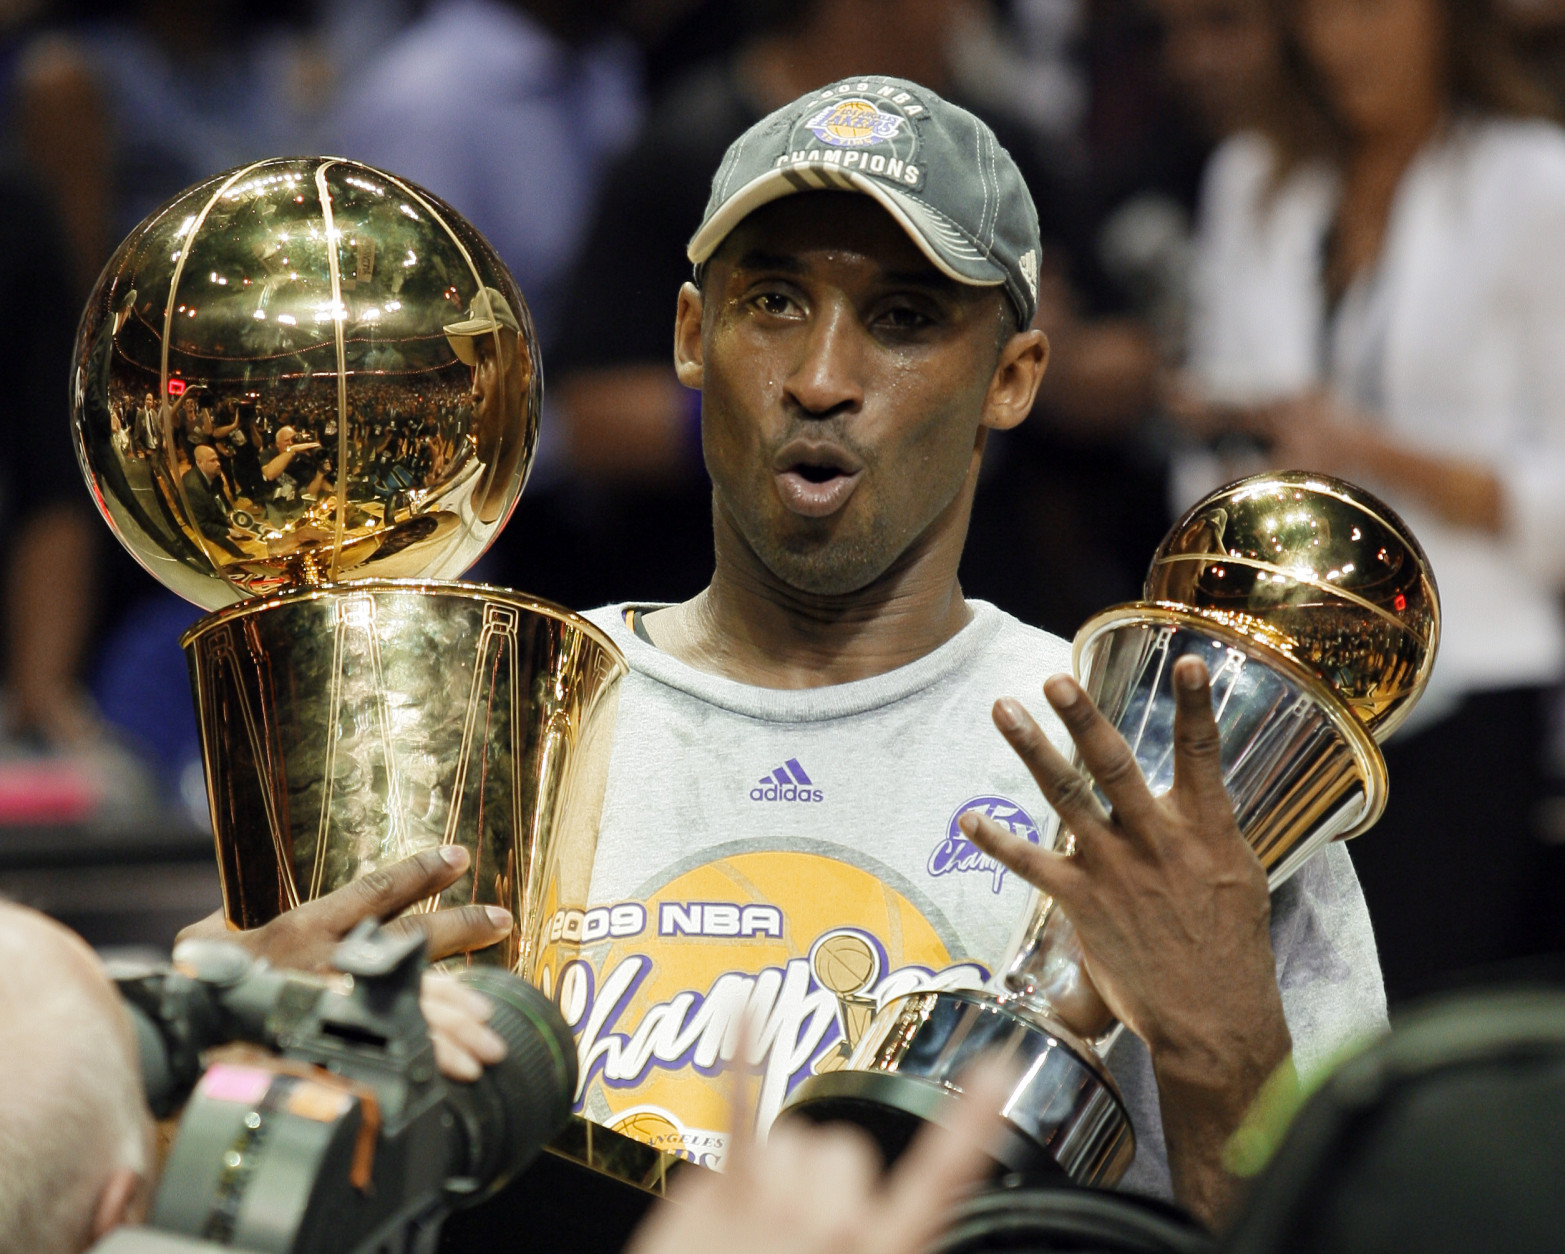 Los Angeles Lakers' Kobe Bryant holds the Larry O'Brien championship trophy and finals MVP trophy after the Lakers beat the Orlando Magic 99-86 in Game 5 of the NBA basketball finals Sunday, June 14, 2009, in Orlando, Fla. (AP Photo/David J. Phillip)